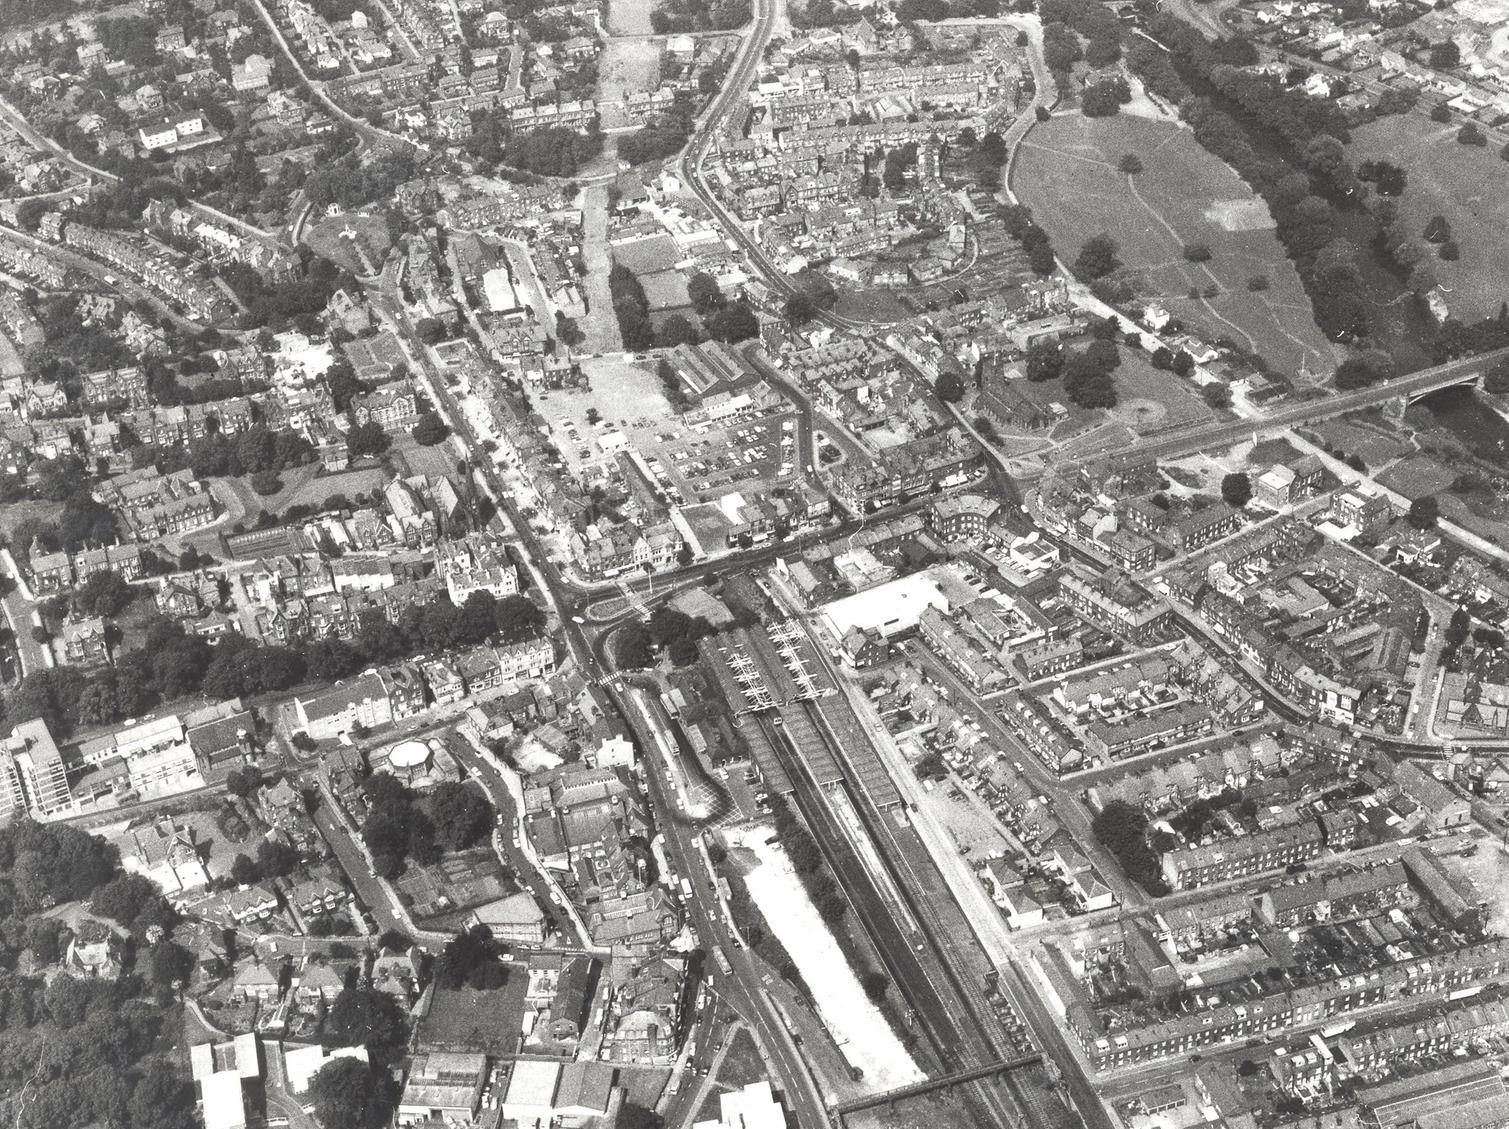 A bird's eye view of Ilkley in the mid-1970s.